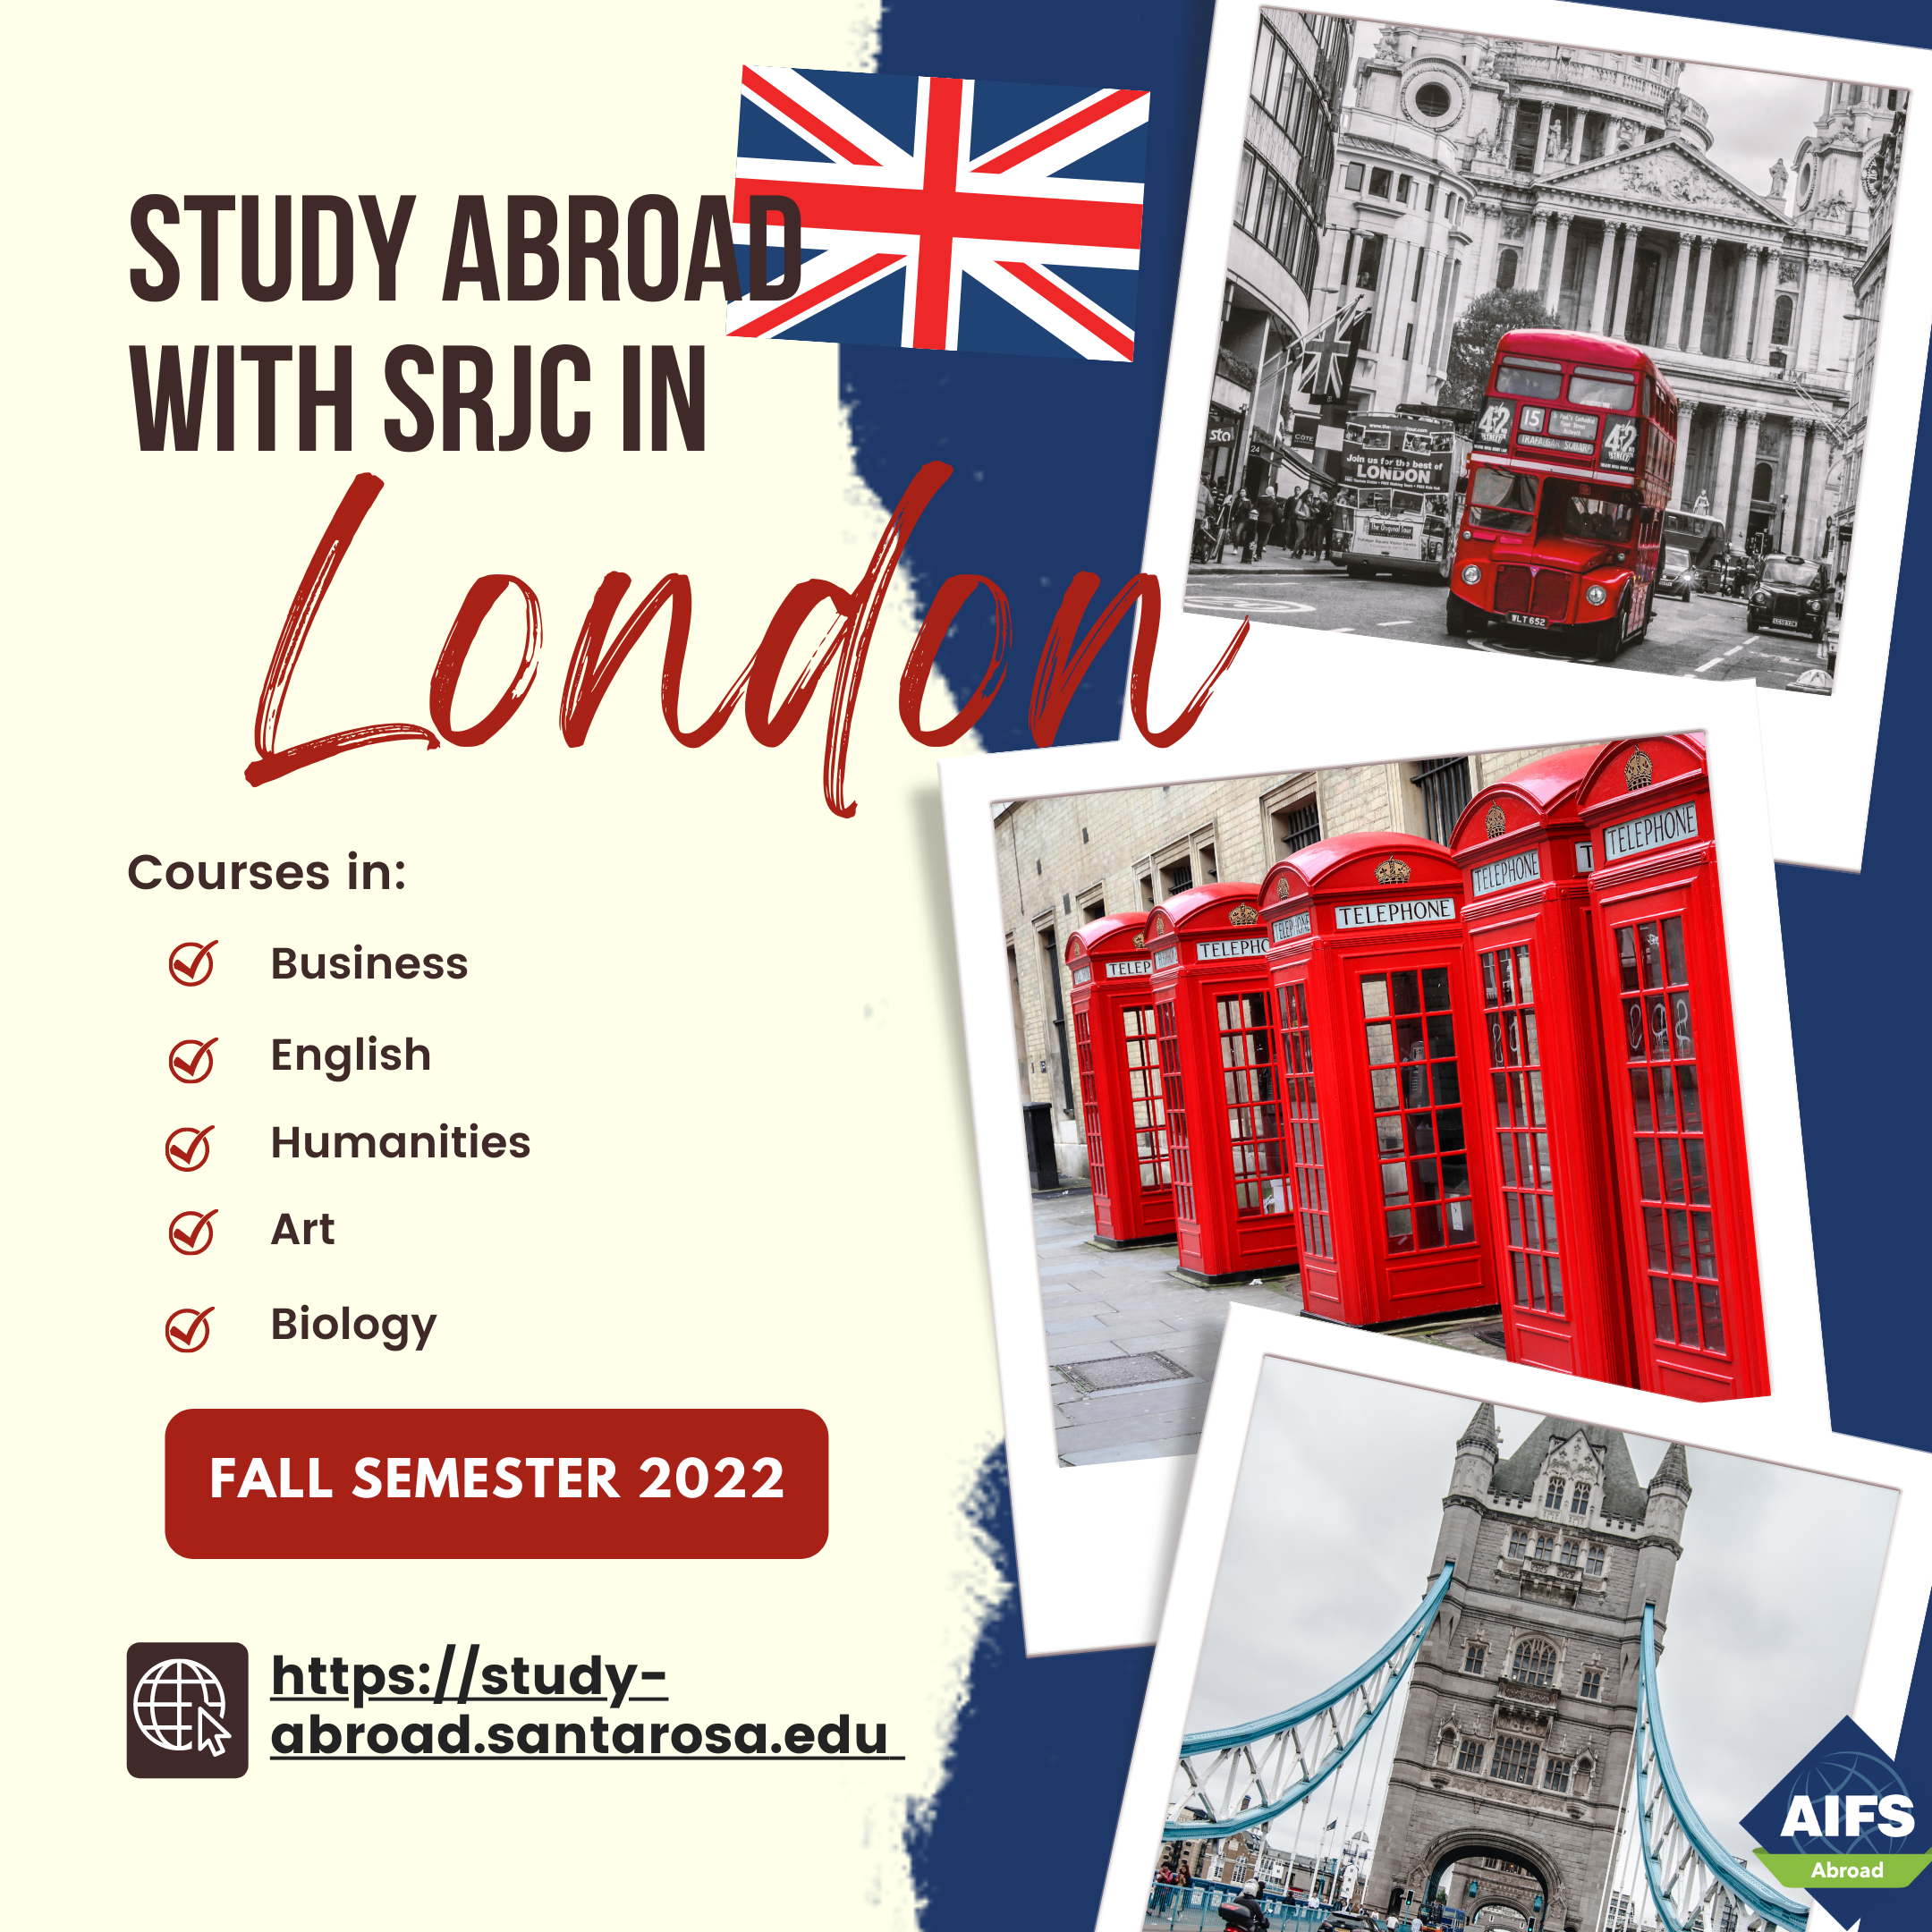 Study with SRJC in London in Fall 2022! Applications open now